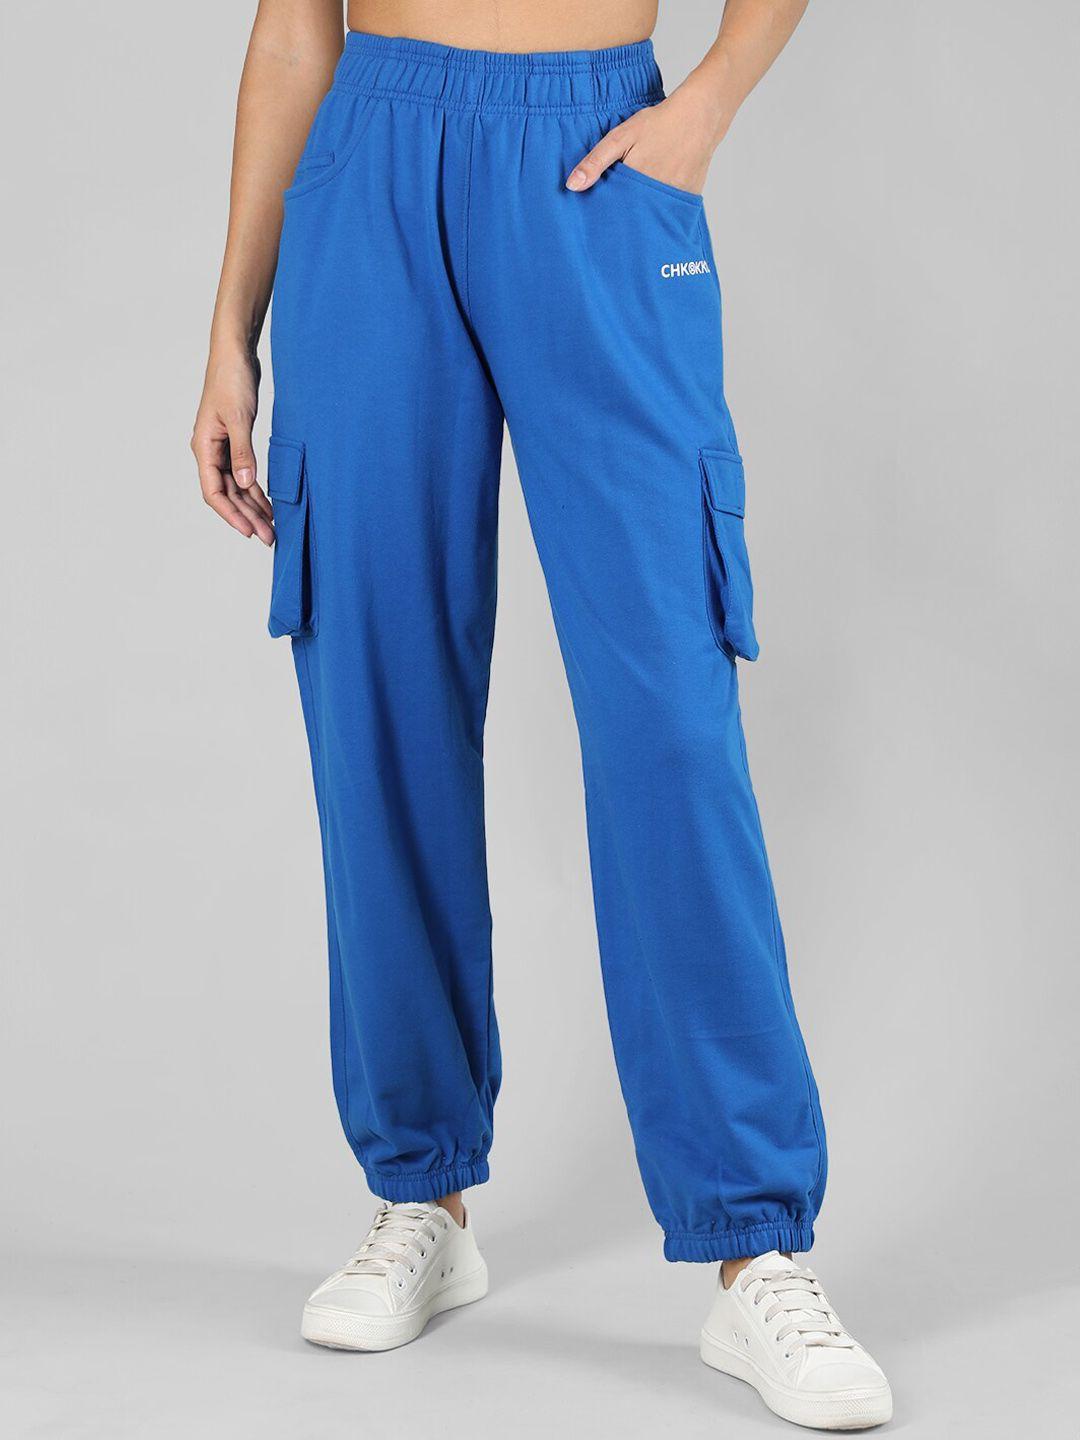 chkokko women mid rise relaxed fit joggers